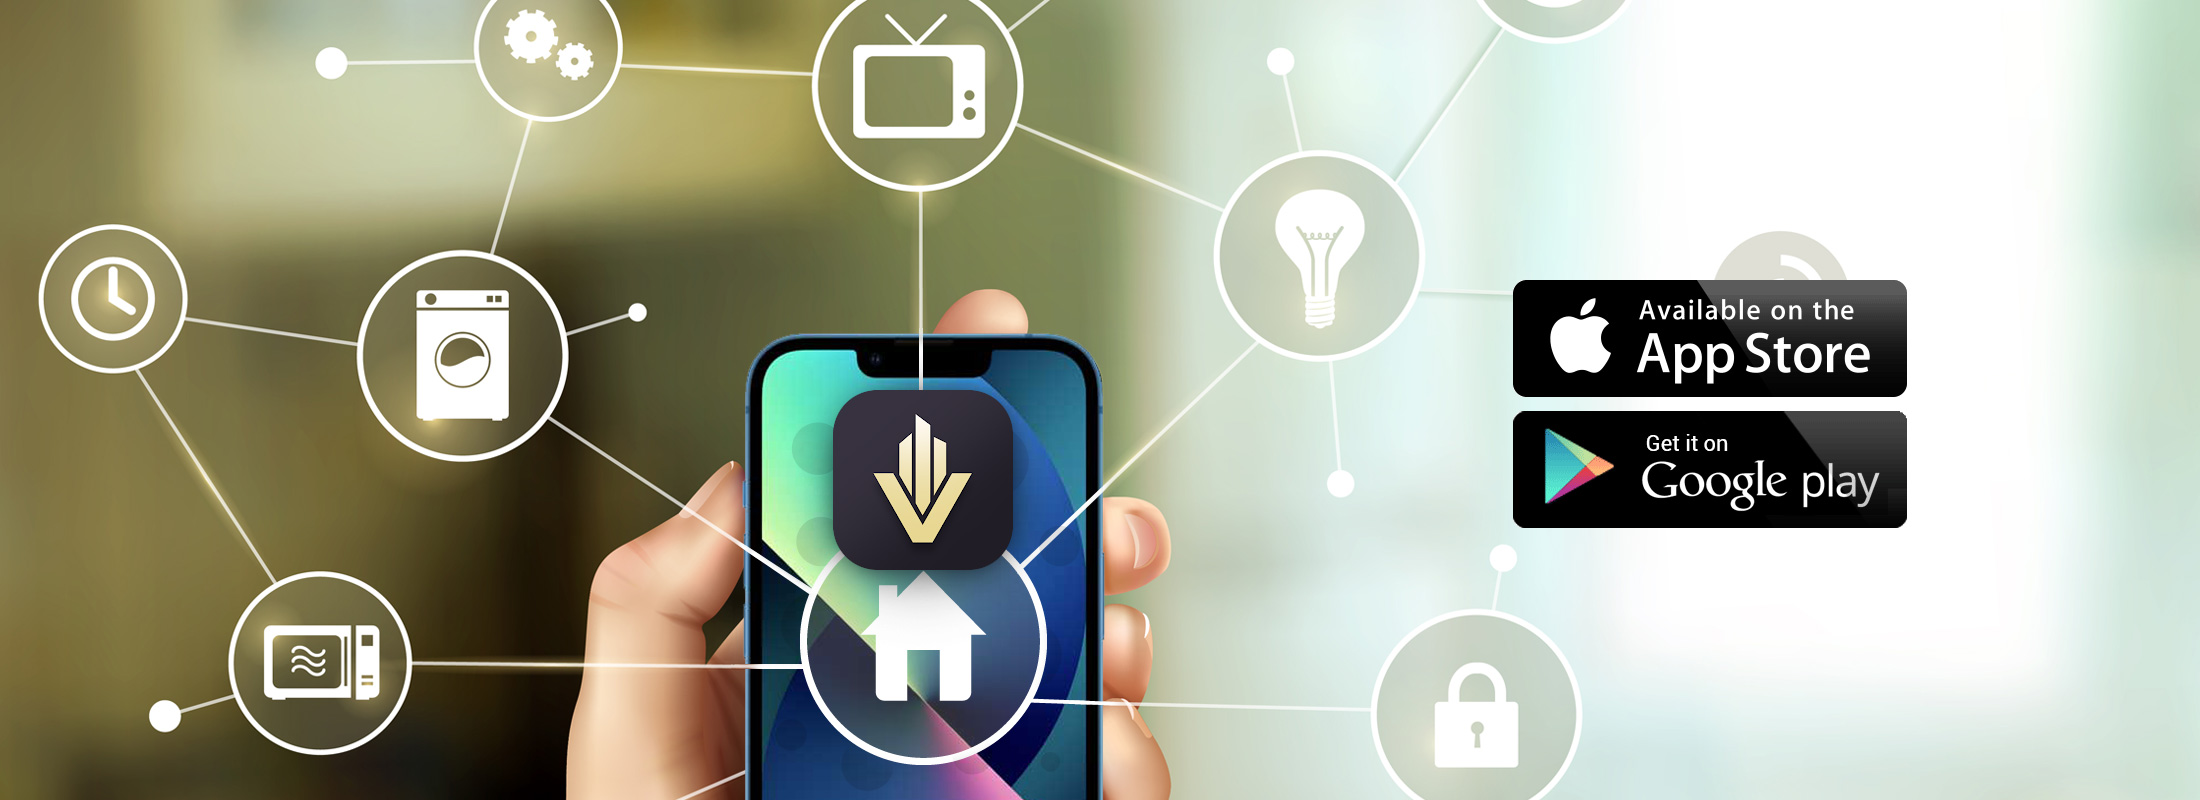 Smart Home APP iOS/Android download banner